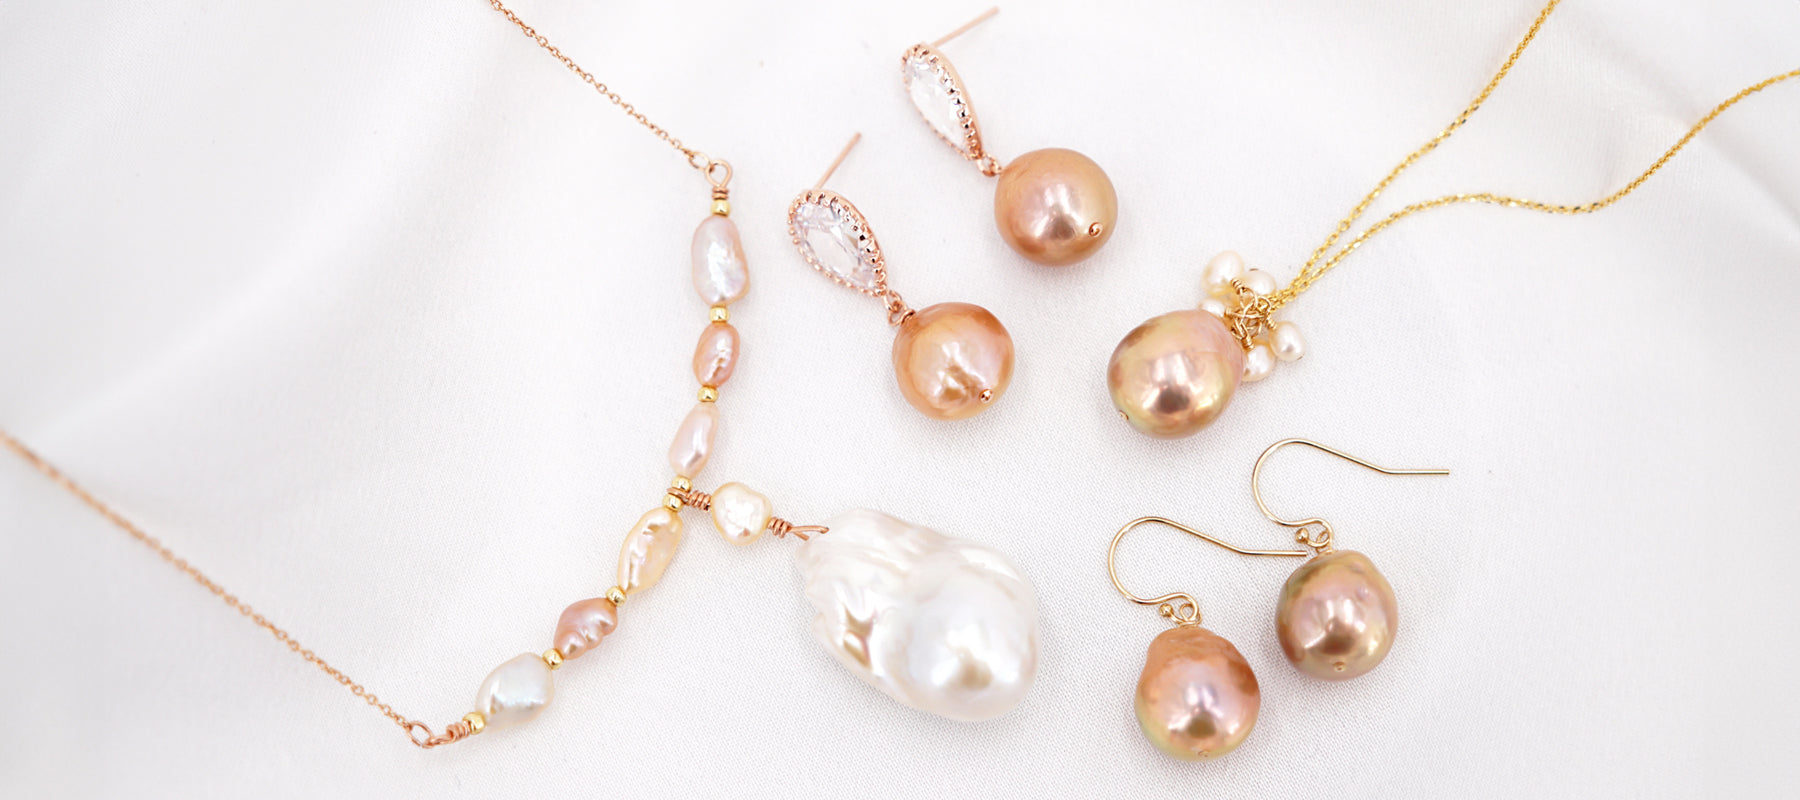 Pearl Jewelry Handmade with Love and Care